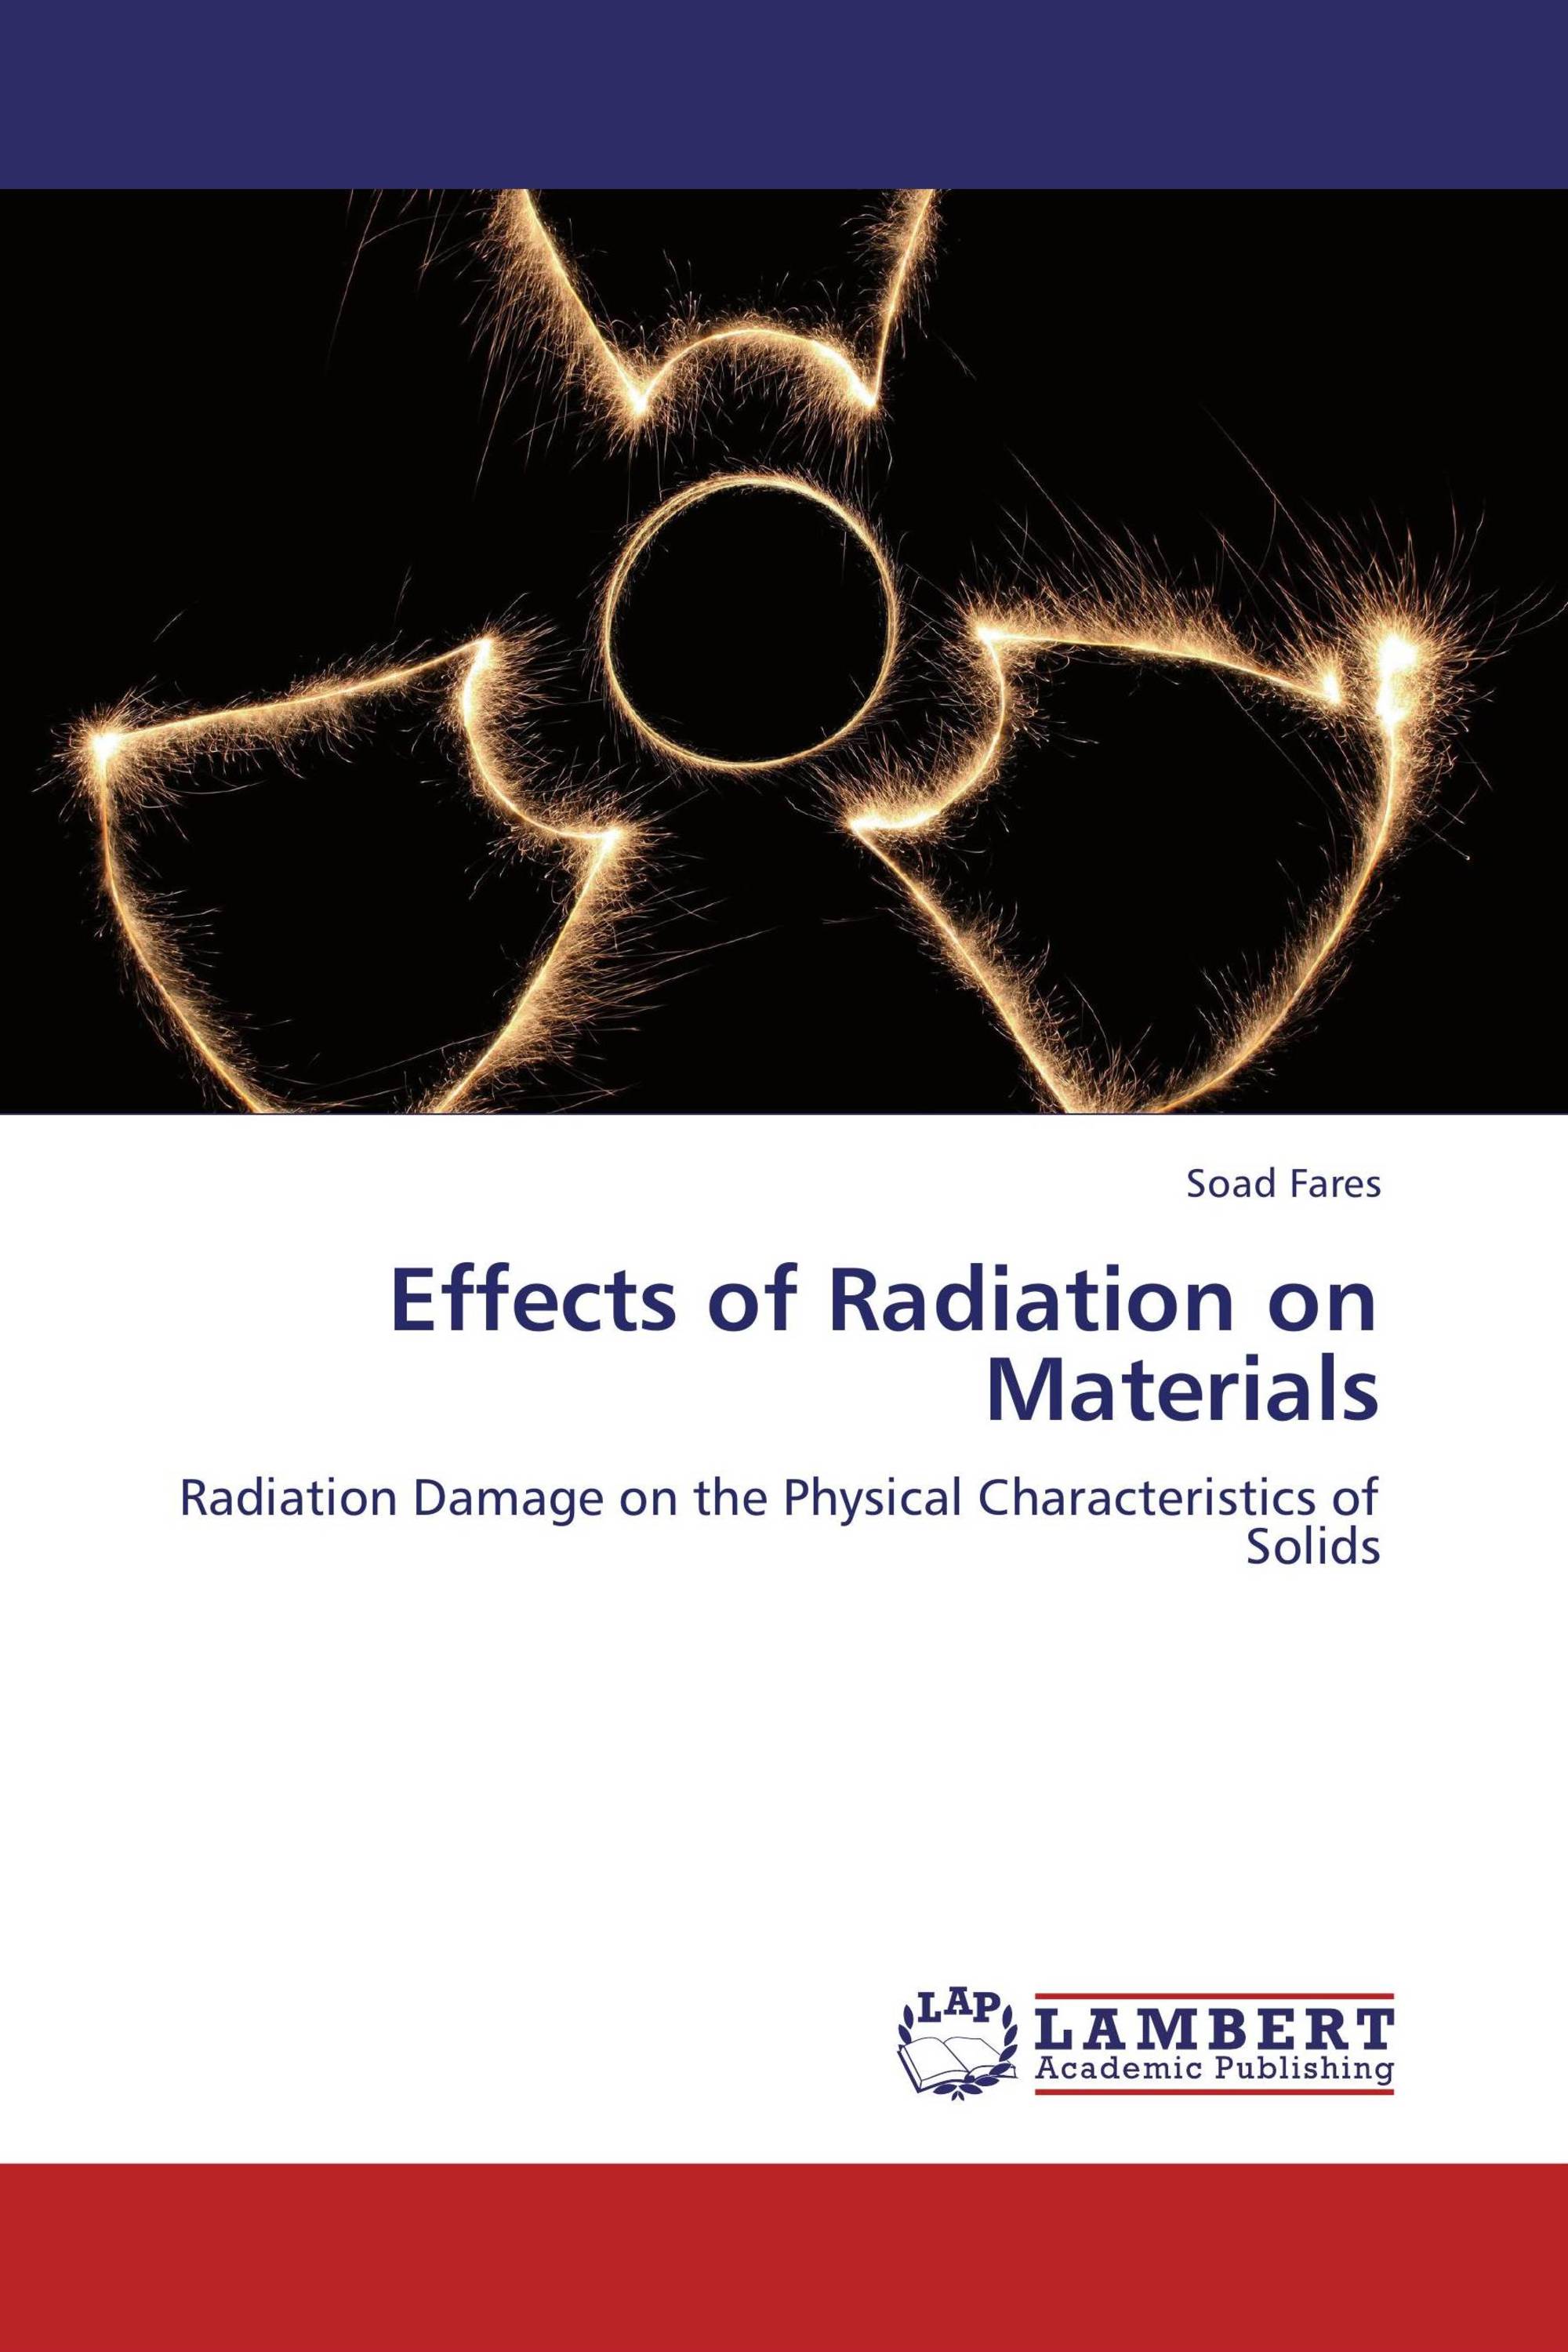 thesis topic on radiation